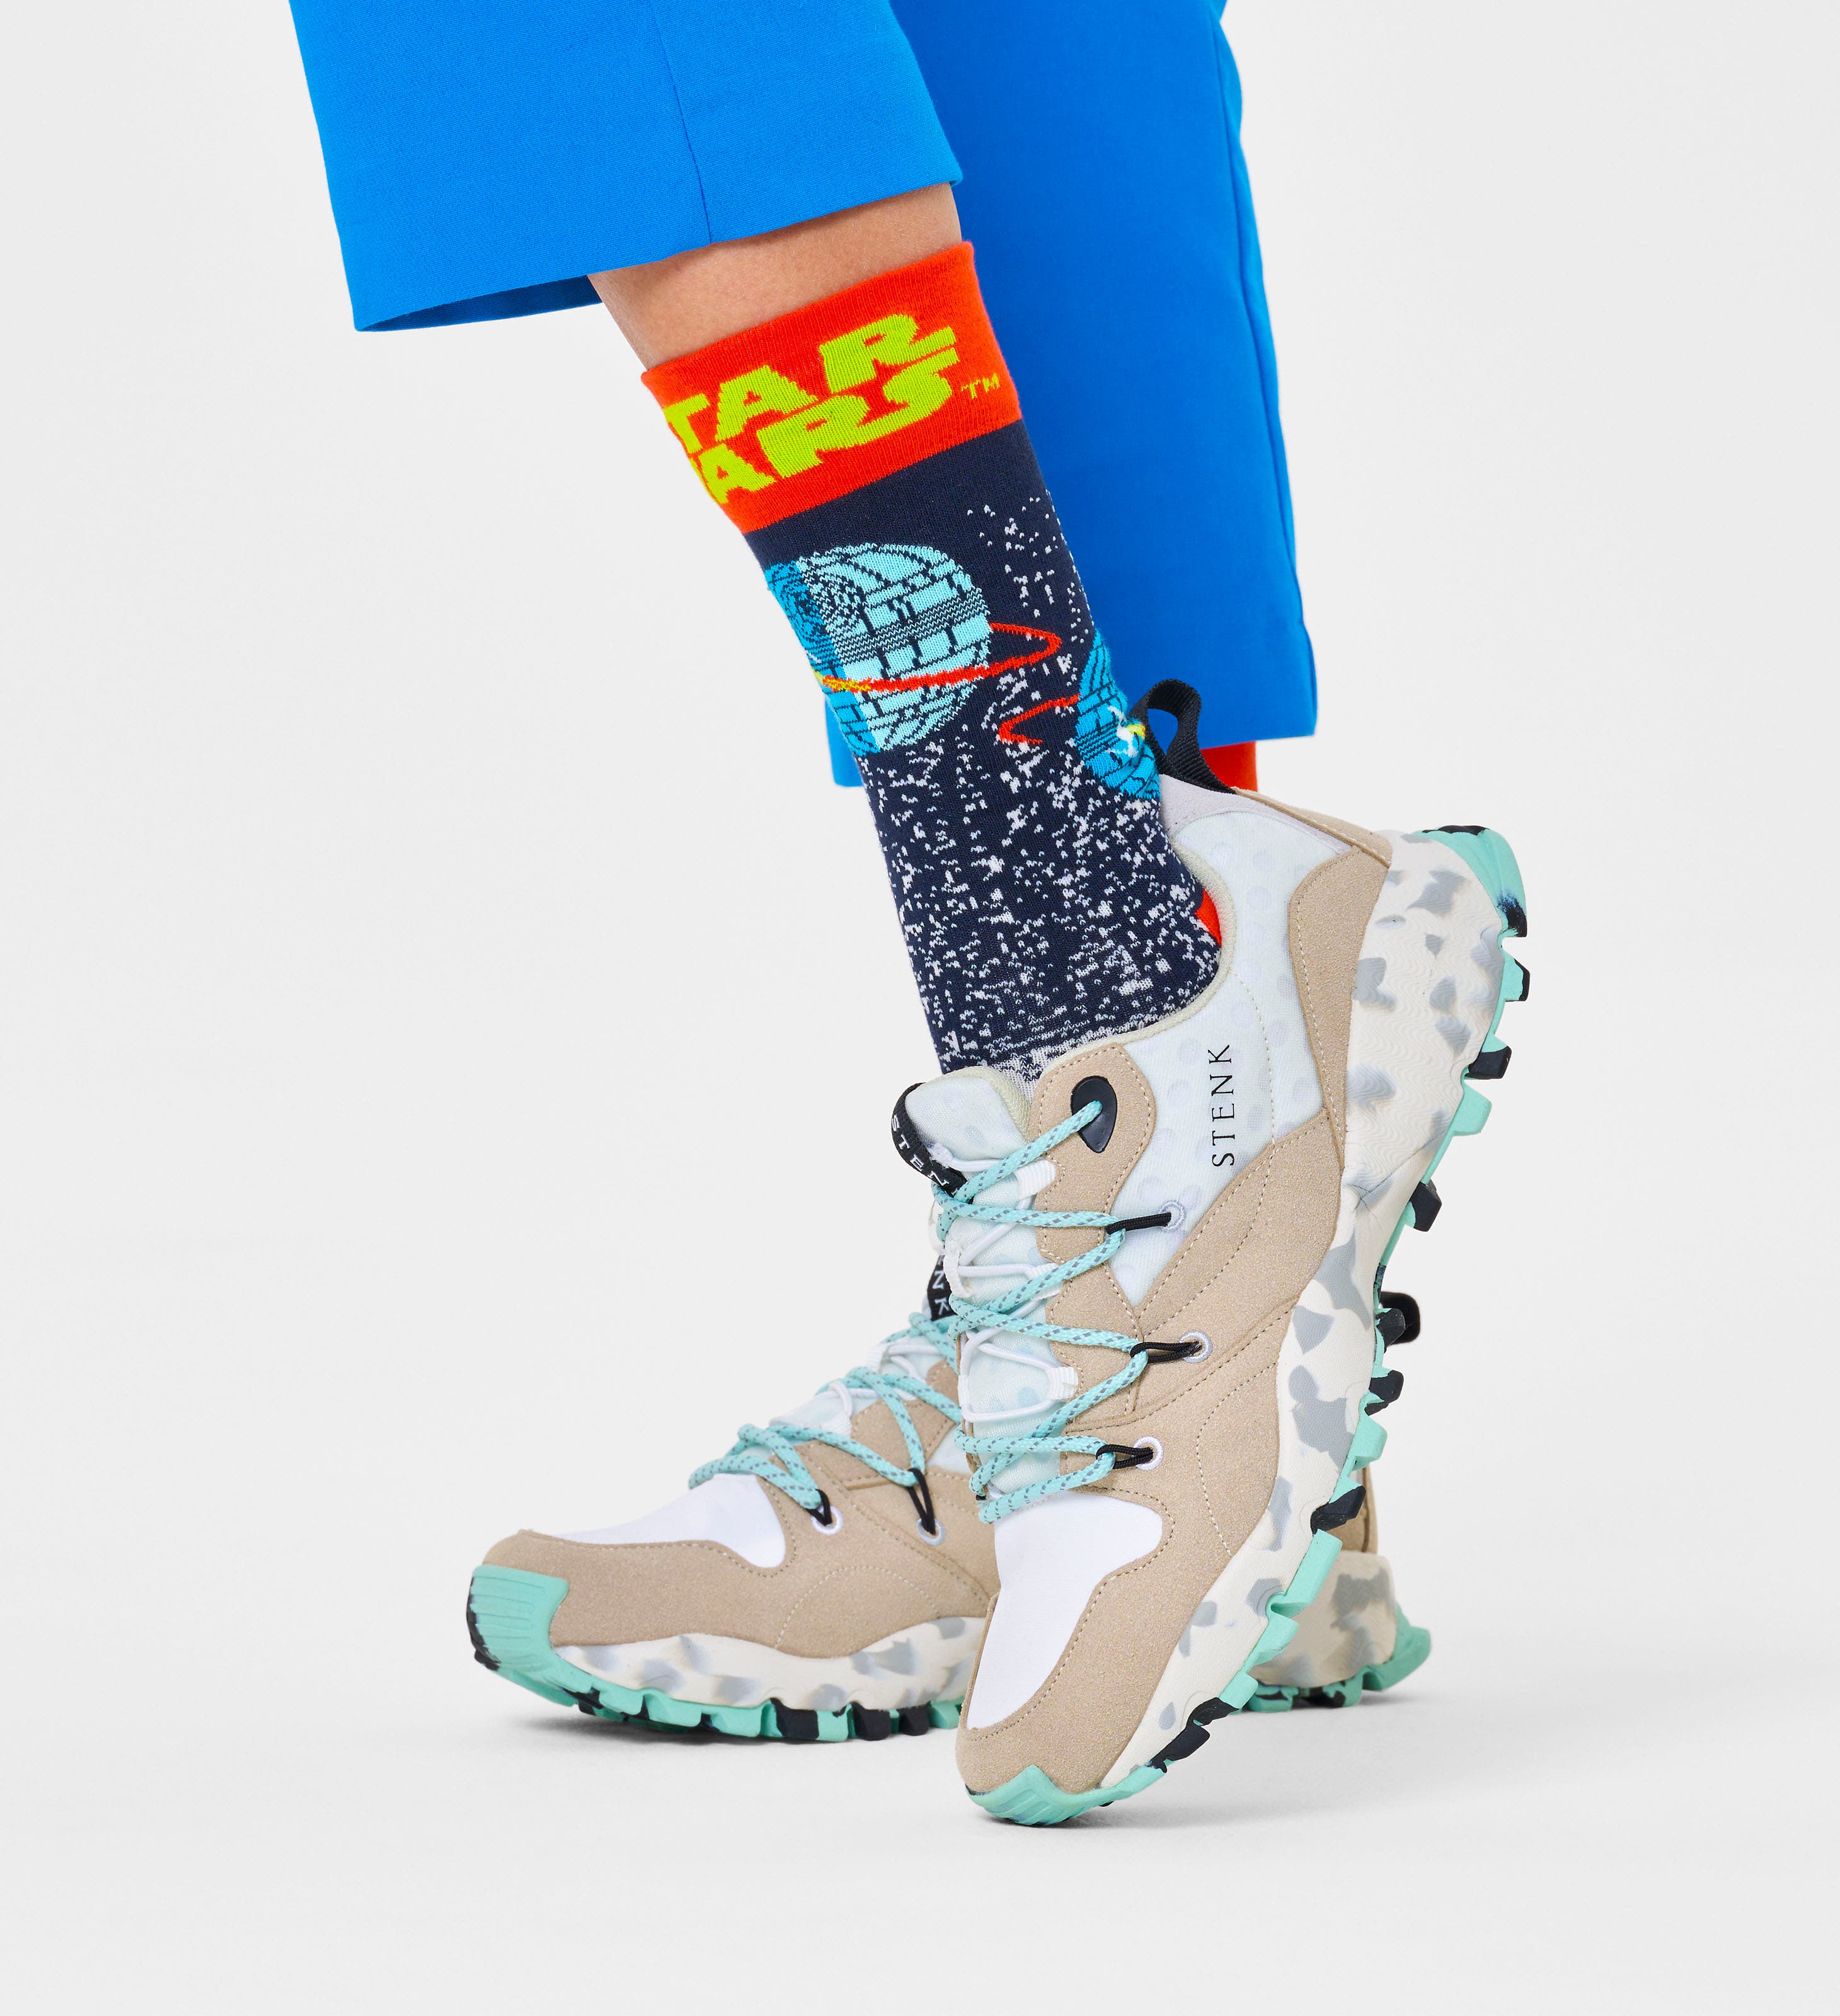 Pop Culture Apparel: Happy Socks' Releases Star Wars Collection